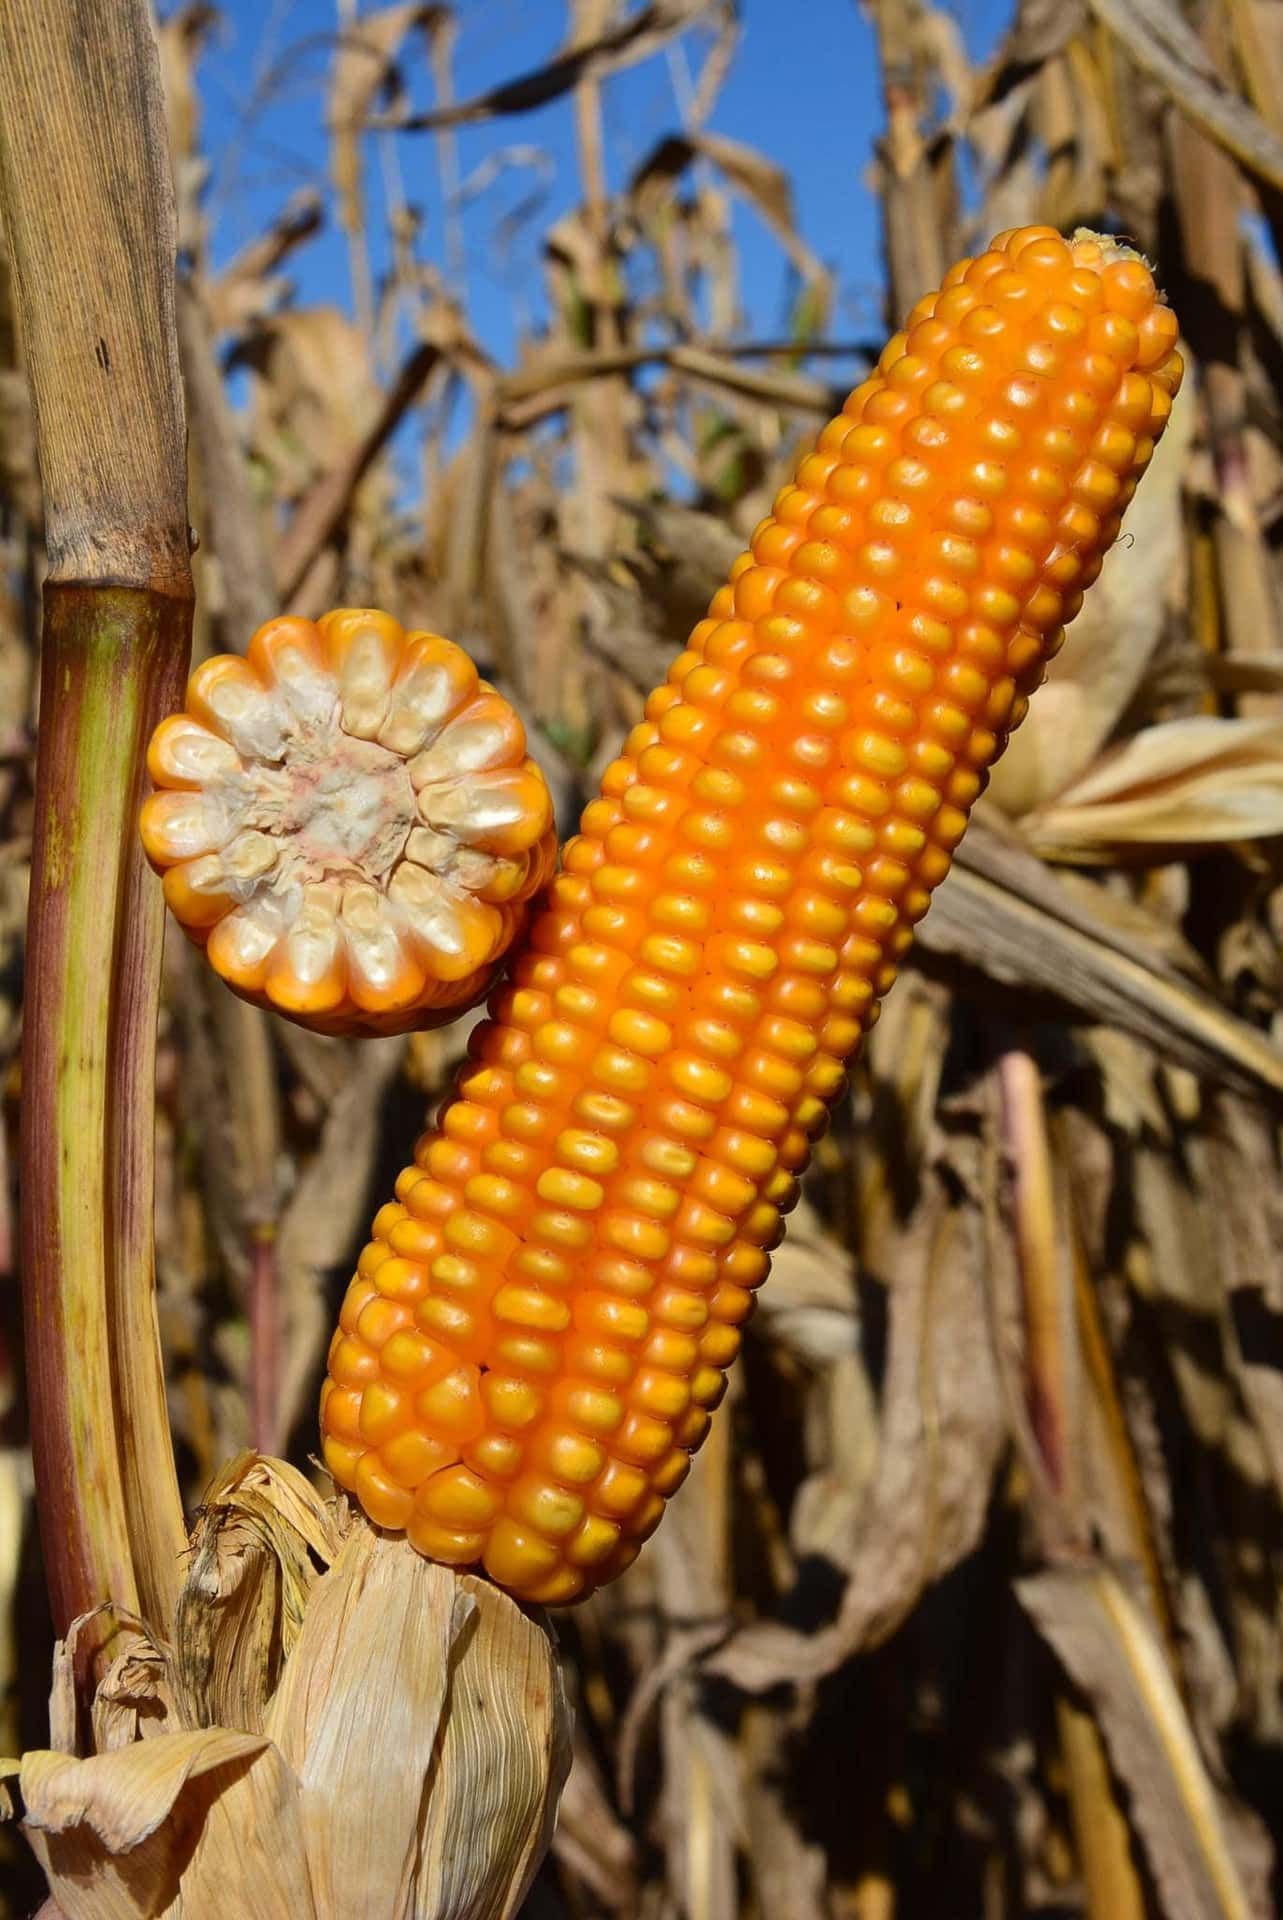 ES HUBBLE
VERY EARLY MAIZE